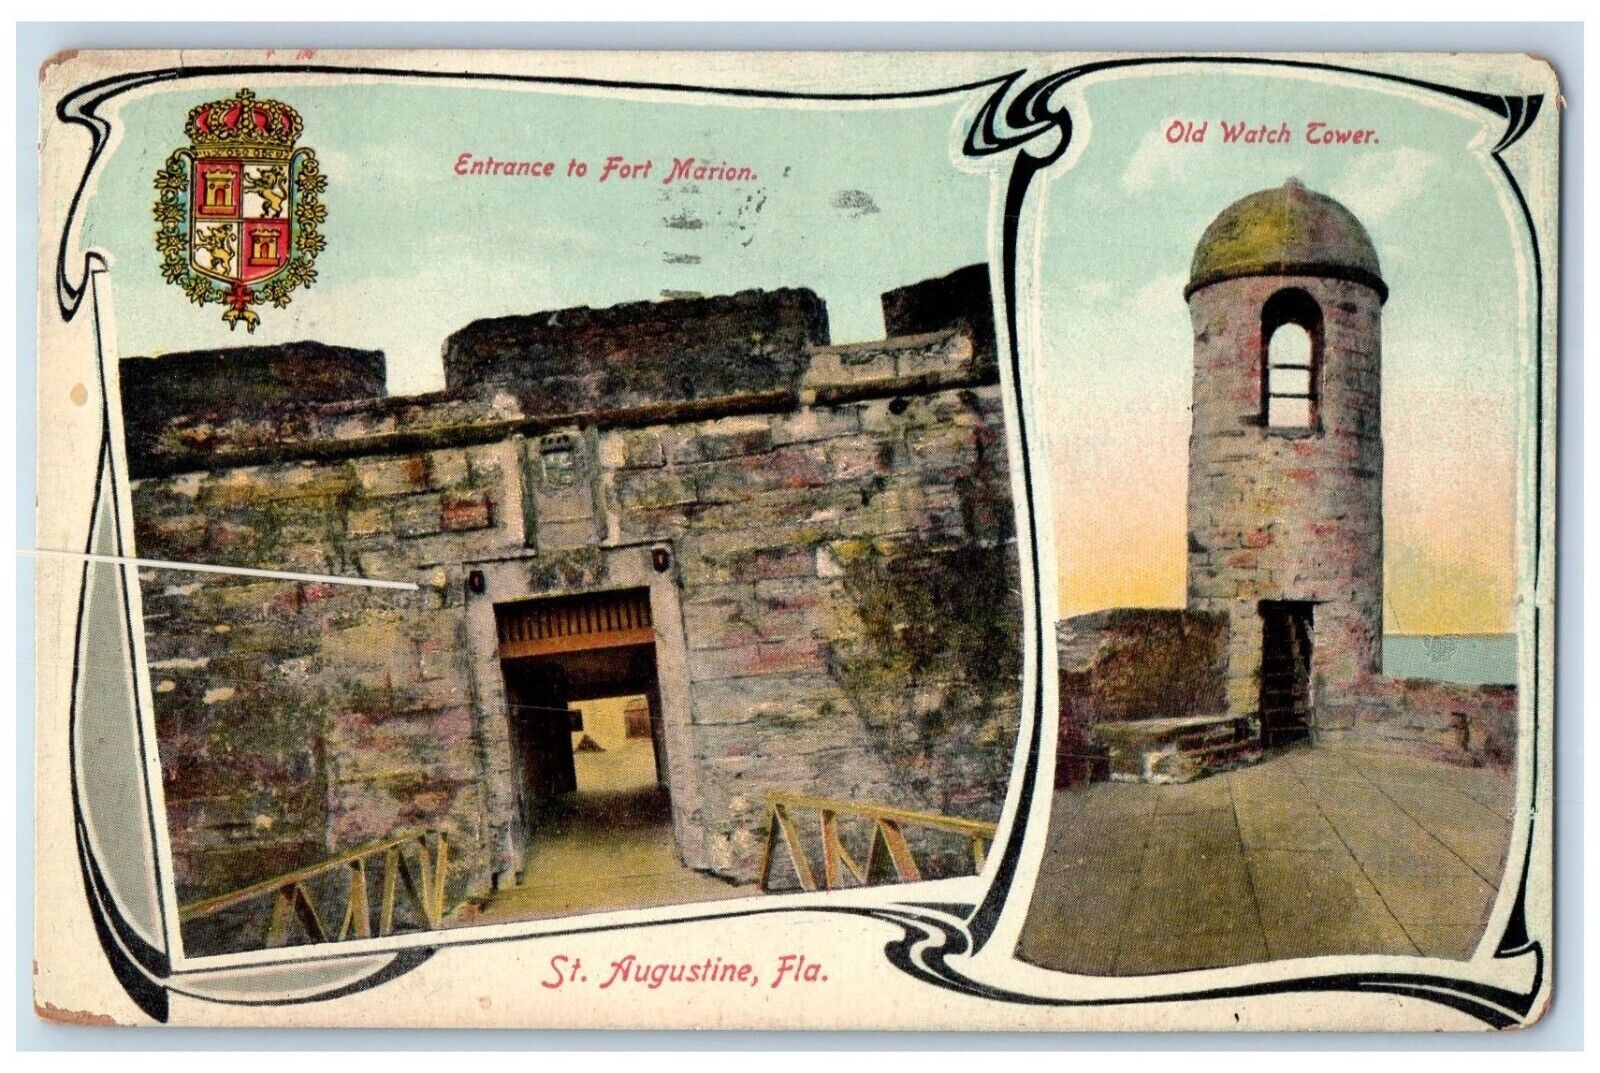 1930 Entrance Fort Marion Old Watch Tower St Augustine Florida Artistic Postcard